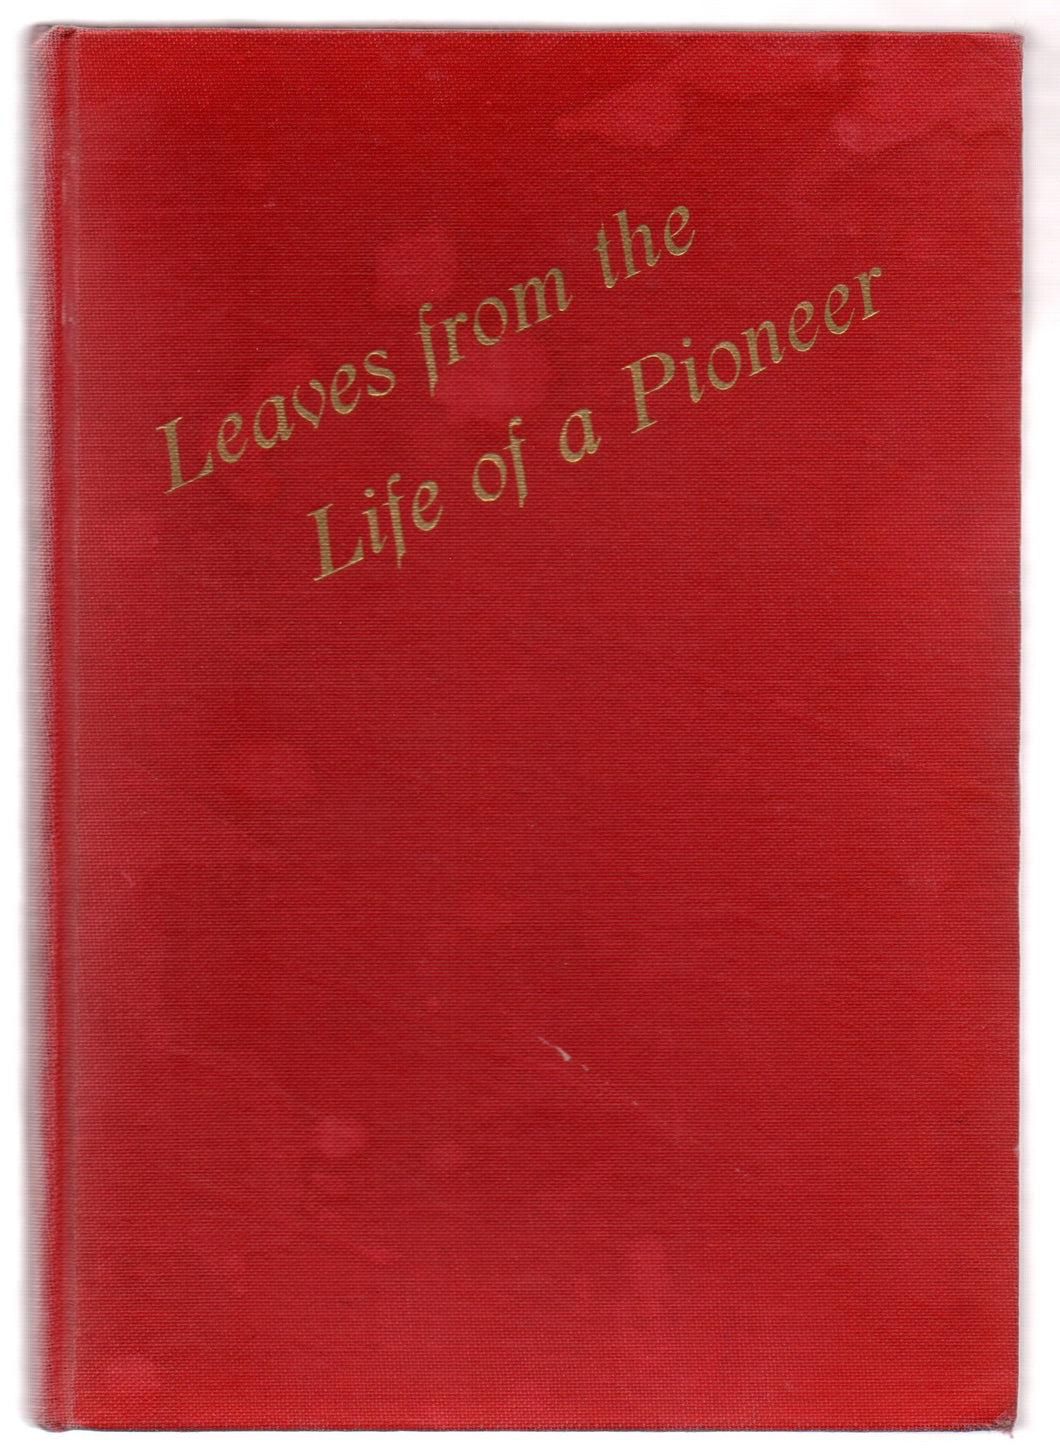 Leaves From The Life of a Pioneer: Being the Autobiography of Sometime Senator Emil Julius Meilicke